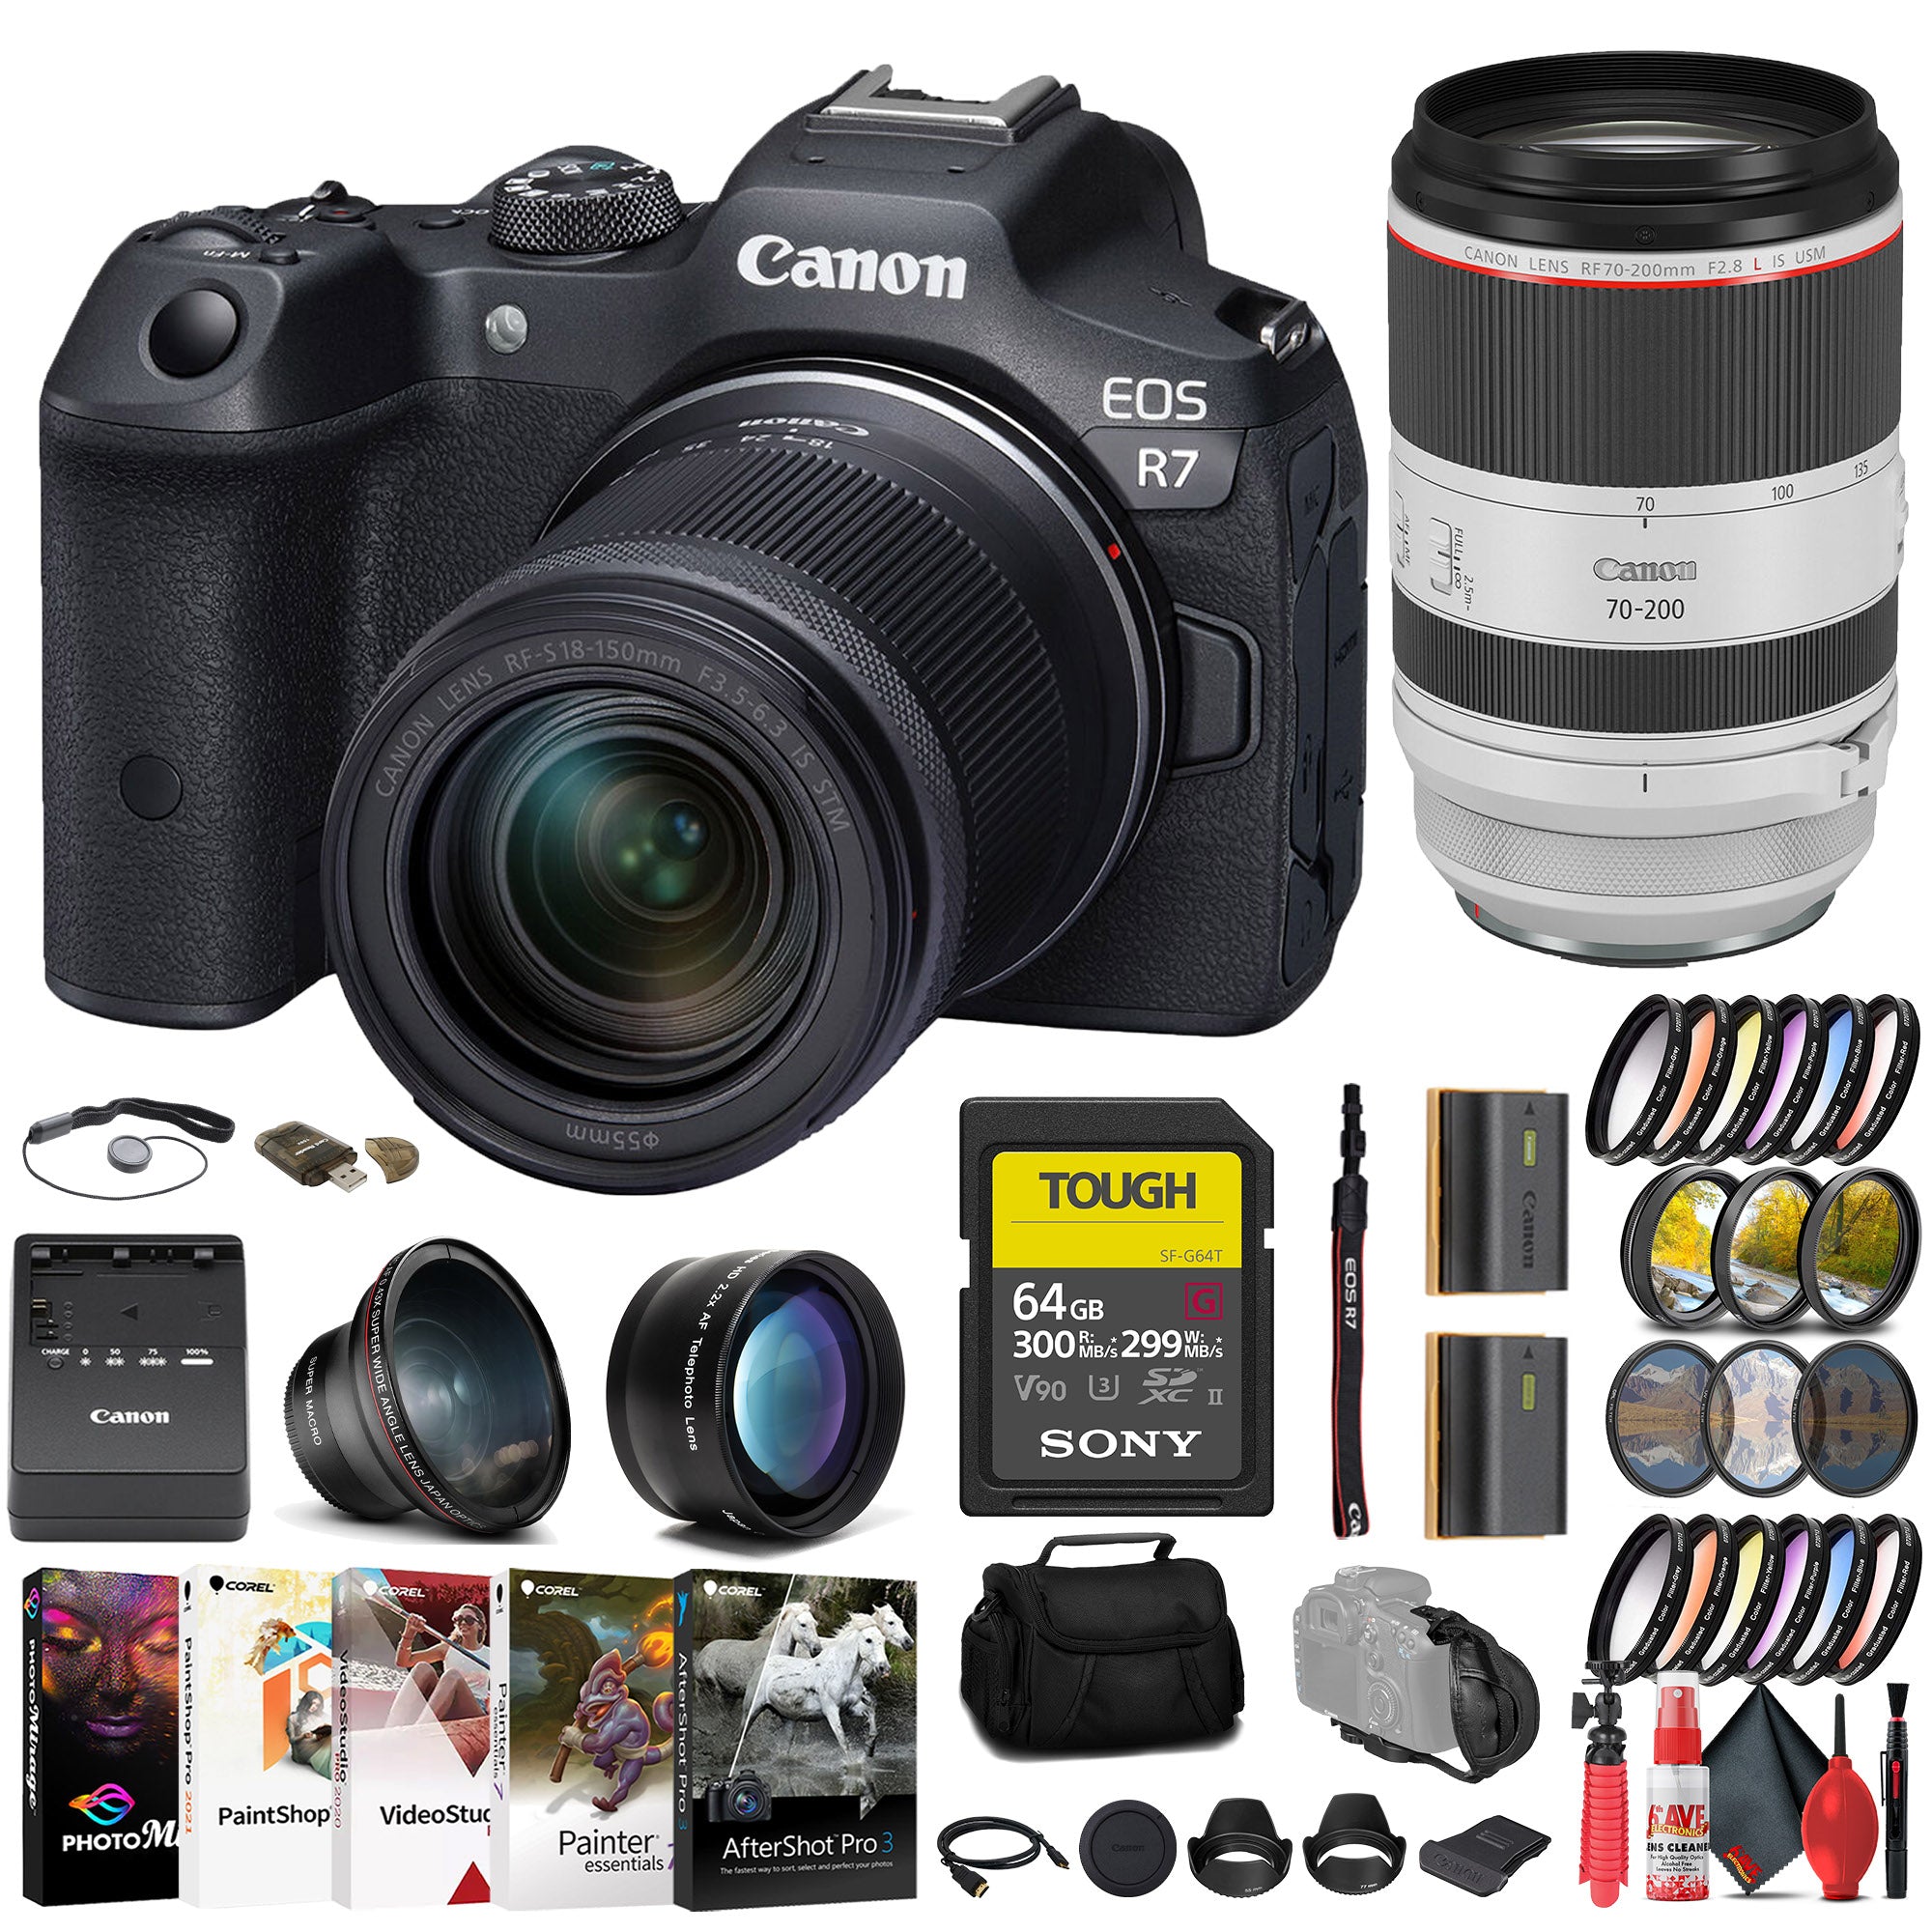 Canon EOS R7 Mirrorless Camera W/ 18-150mm Lens + Canon 70-200mm Lens + 64GB + More